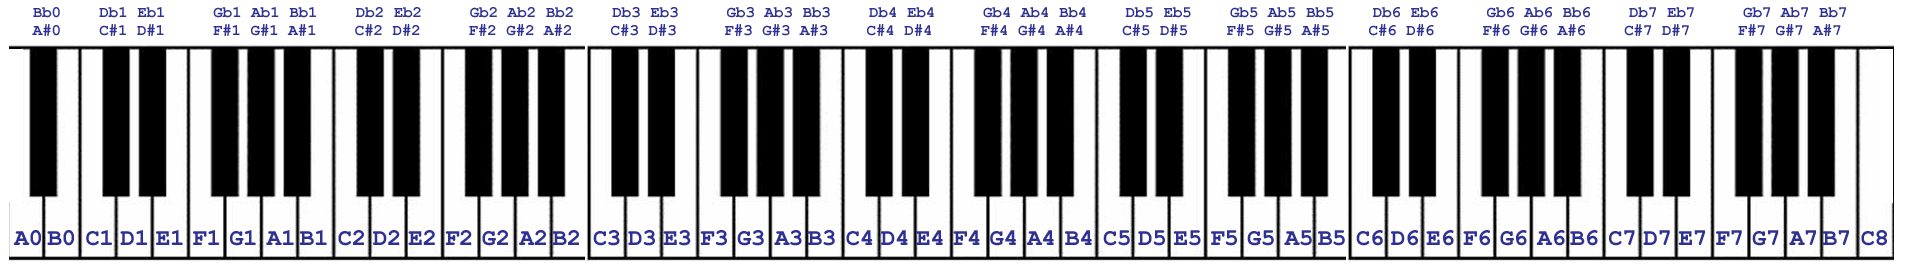 How To Label And Write Notes On The Piano Keyboard A Basic Guide